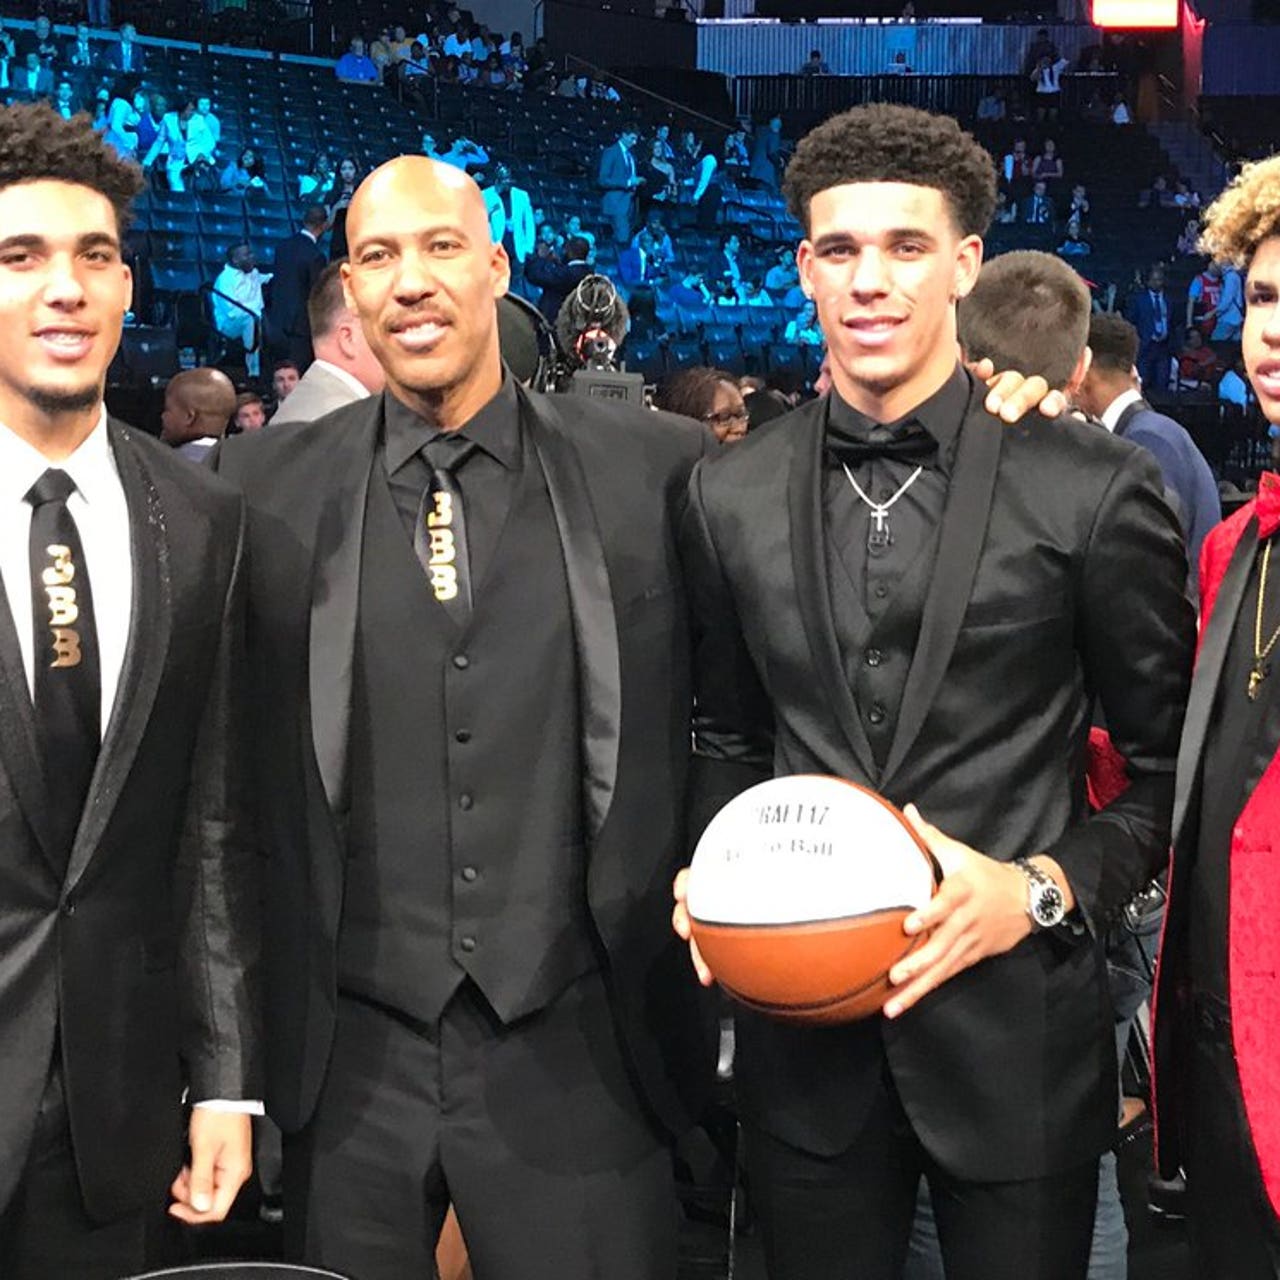 Why the Lakers should draft Lonzo Ball